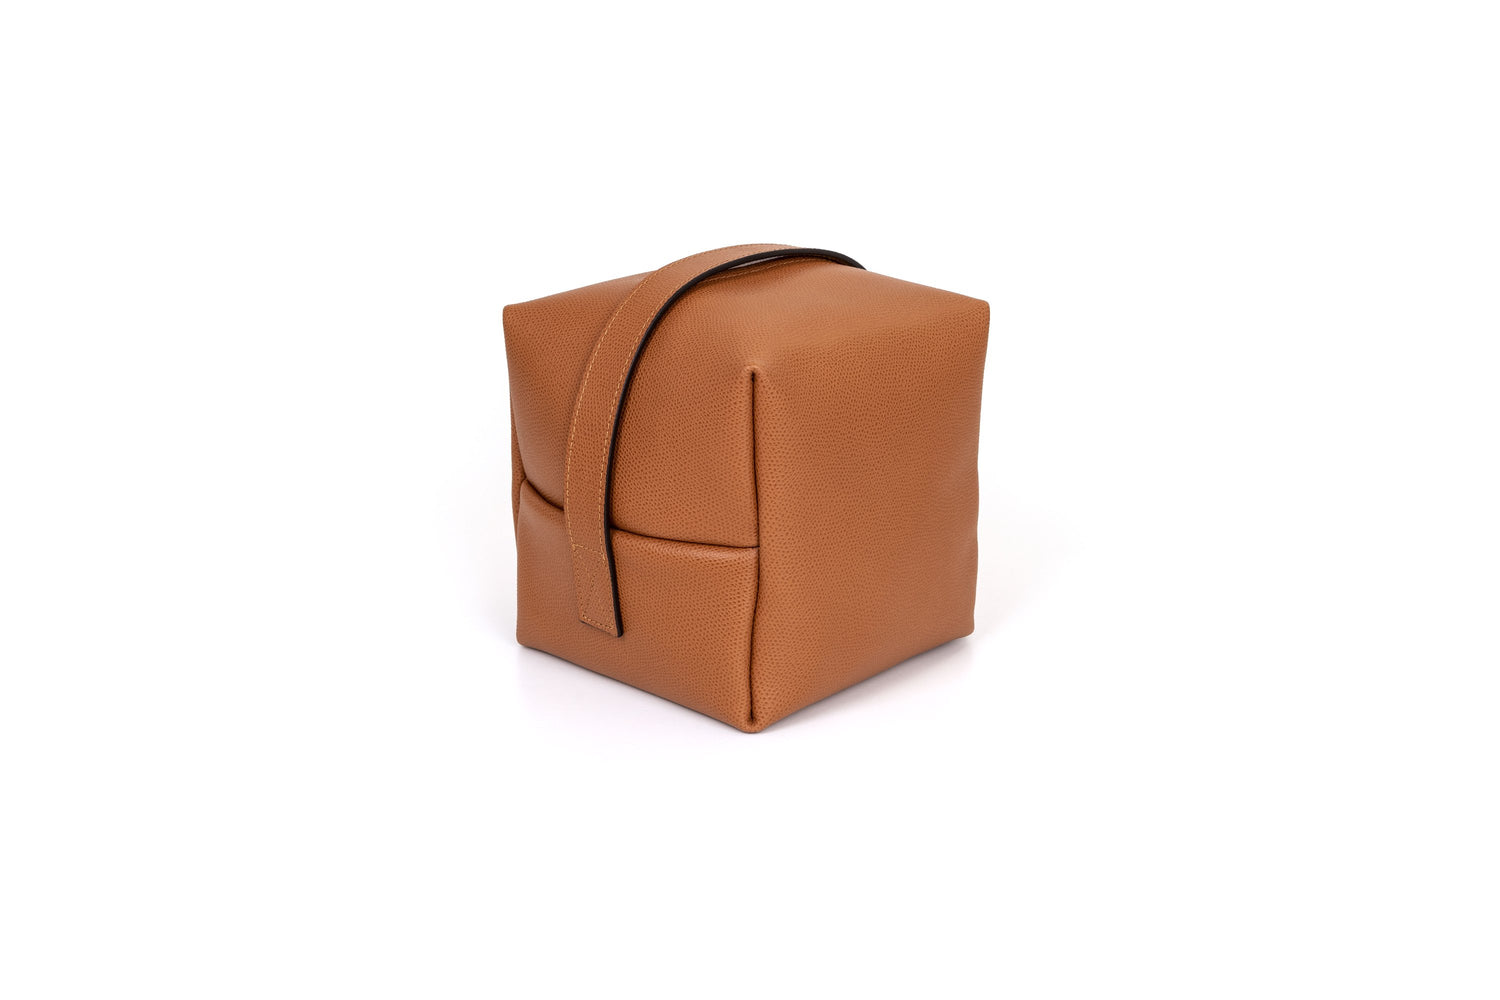 Pinetti Leather Doorstop With Handle | Stylish and Functional Design | Perfect for Holding Doors Open | Explore a Range of Luxury Home Accessories at 2Jour Concierge, #1 luxury high-end gift & lifestyle shop